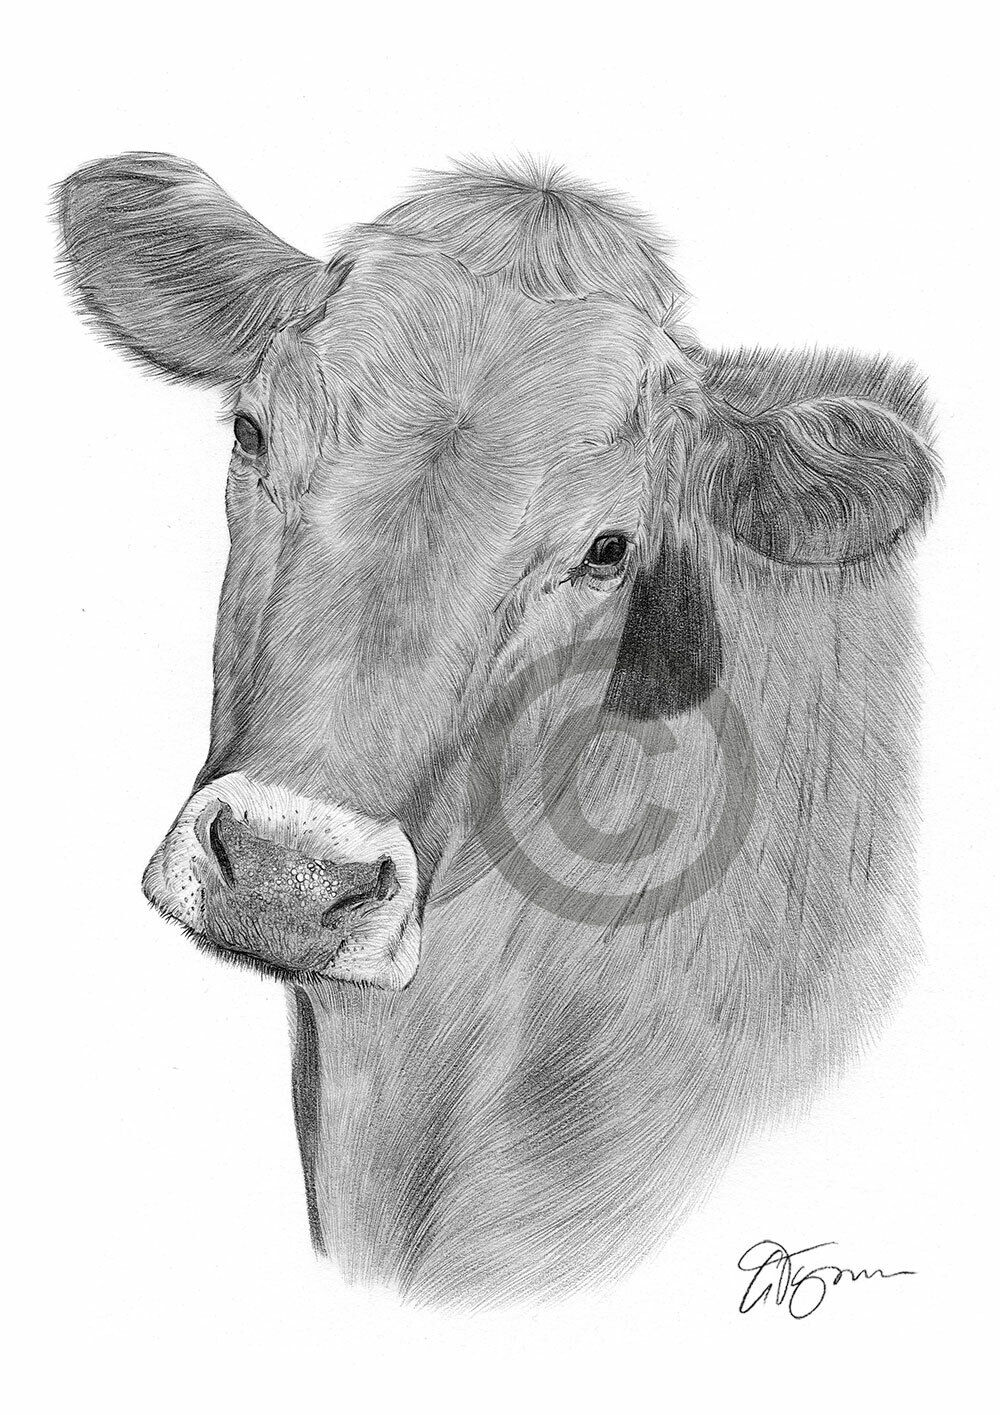 Cow drawing Images - Search Images on Everypixel